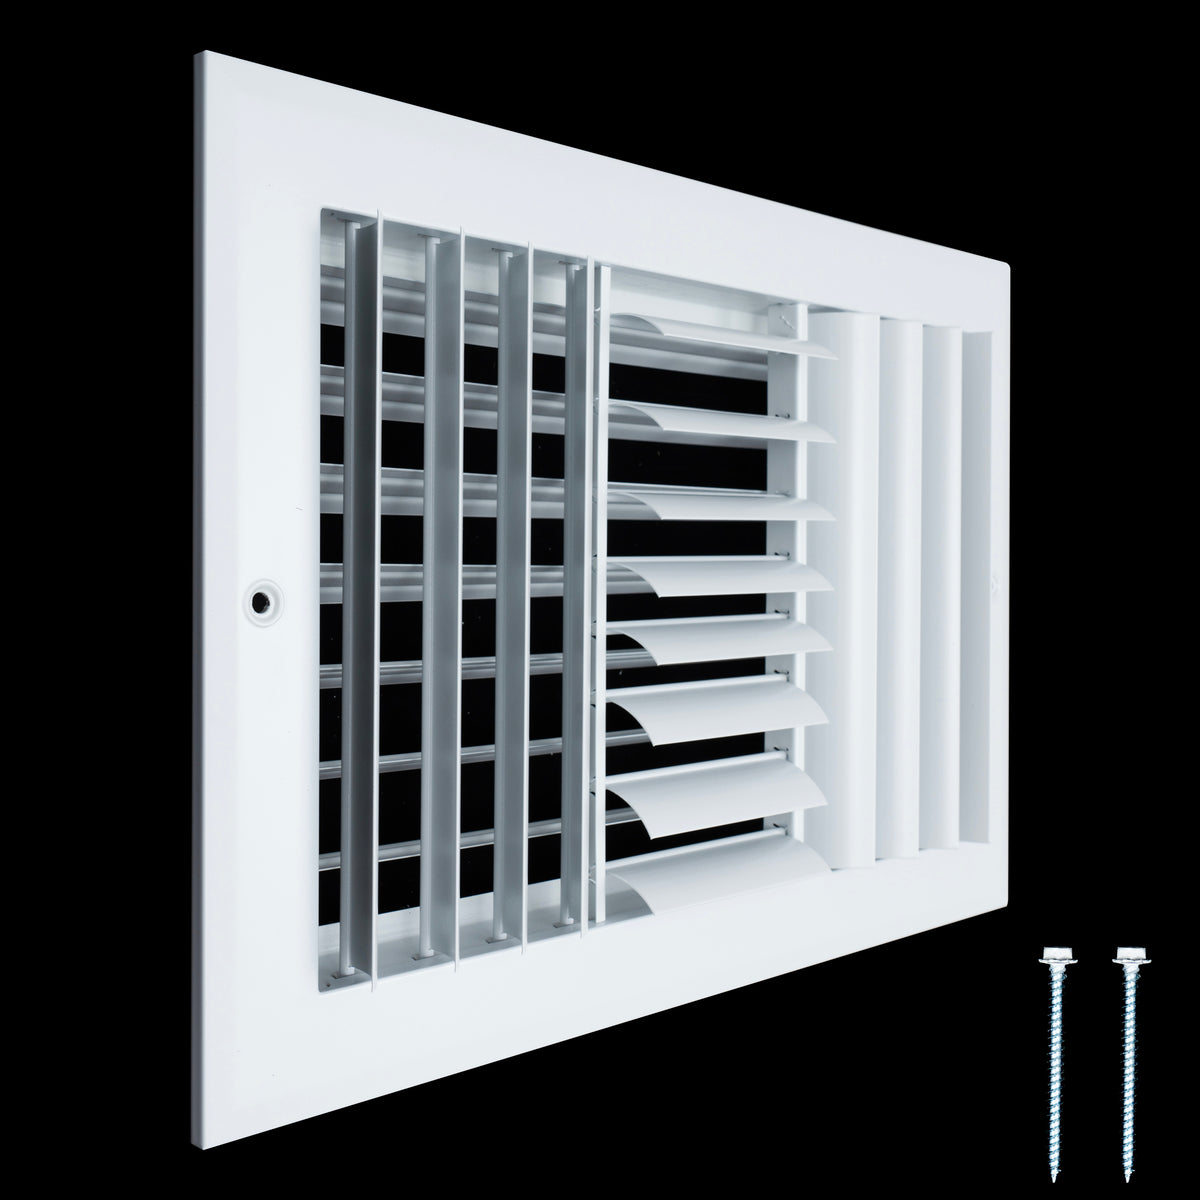 12"W x 8"H [Duct Opening] Aluminum 3-WAY Adjustable Air Supply Grille | Register Vent Cover Grill for Sidewall and Ceiling | White | Outer Dimensions: 13.75"W x 9.75"